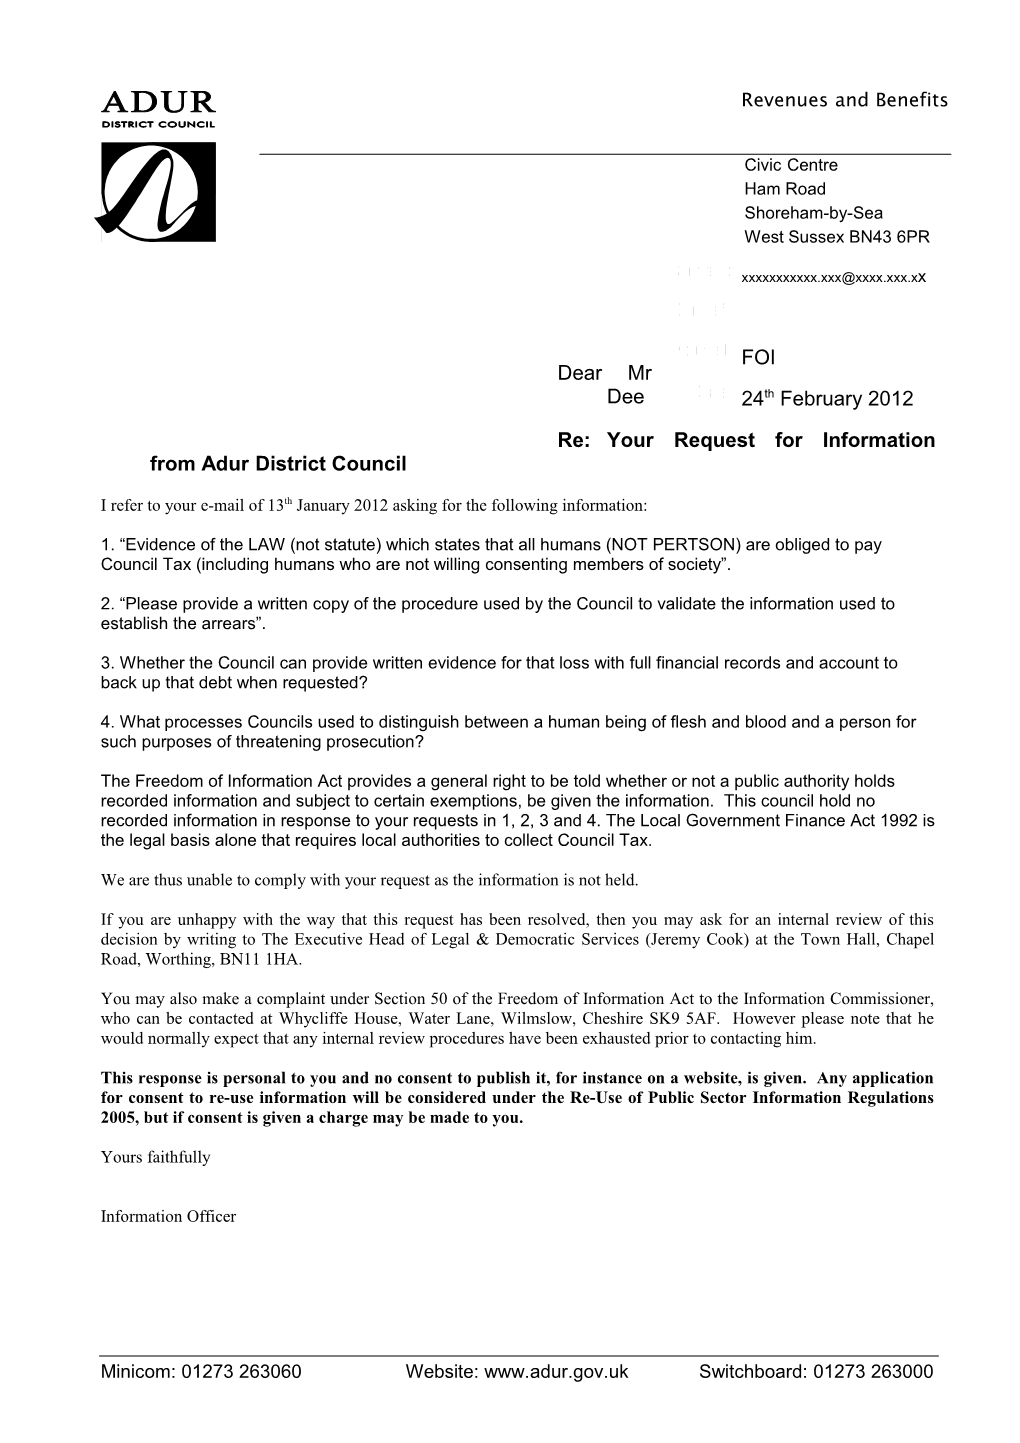 Re: Your Request for Information from Adur District Council